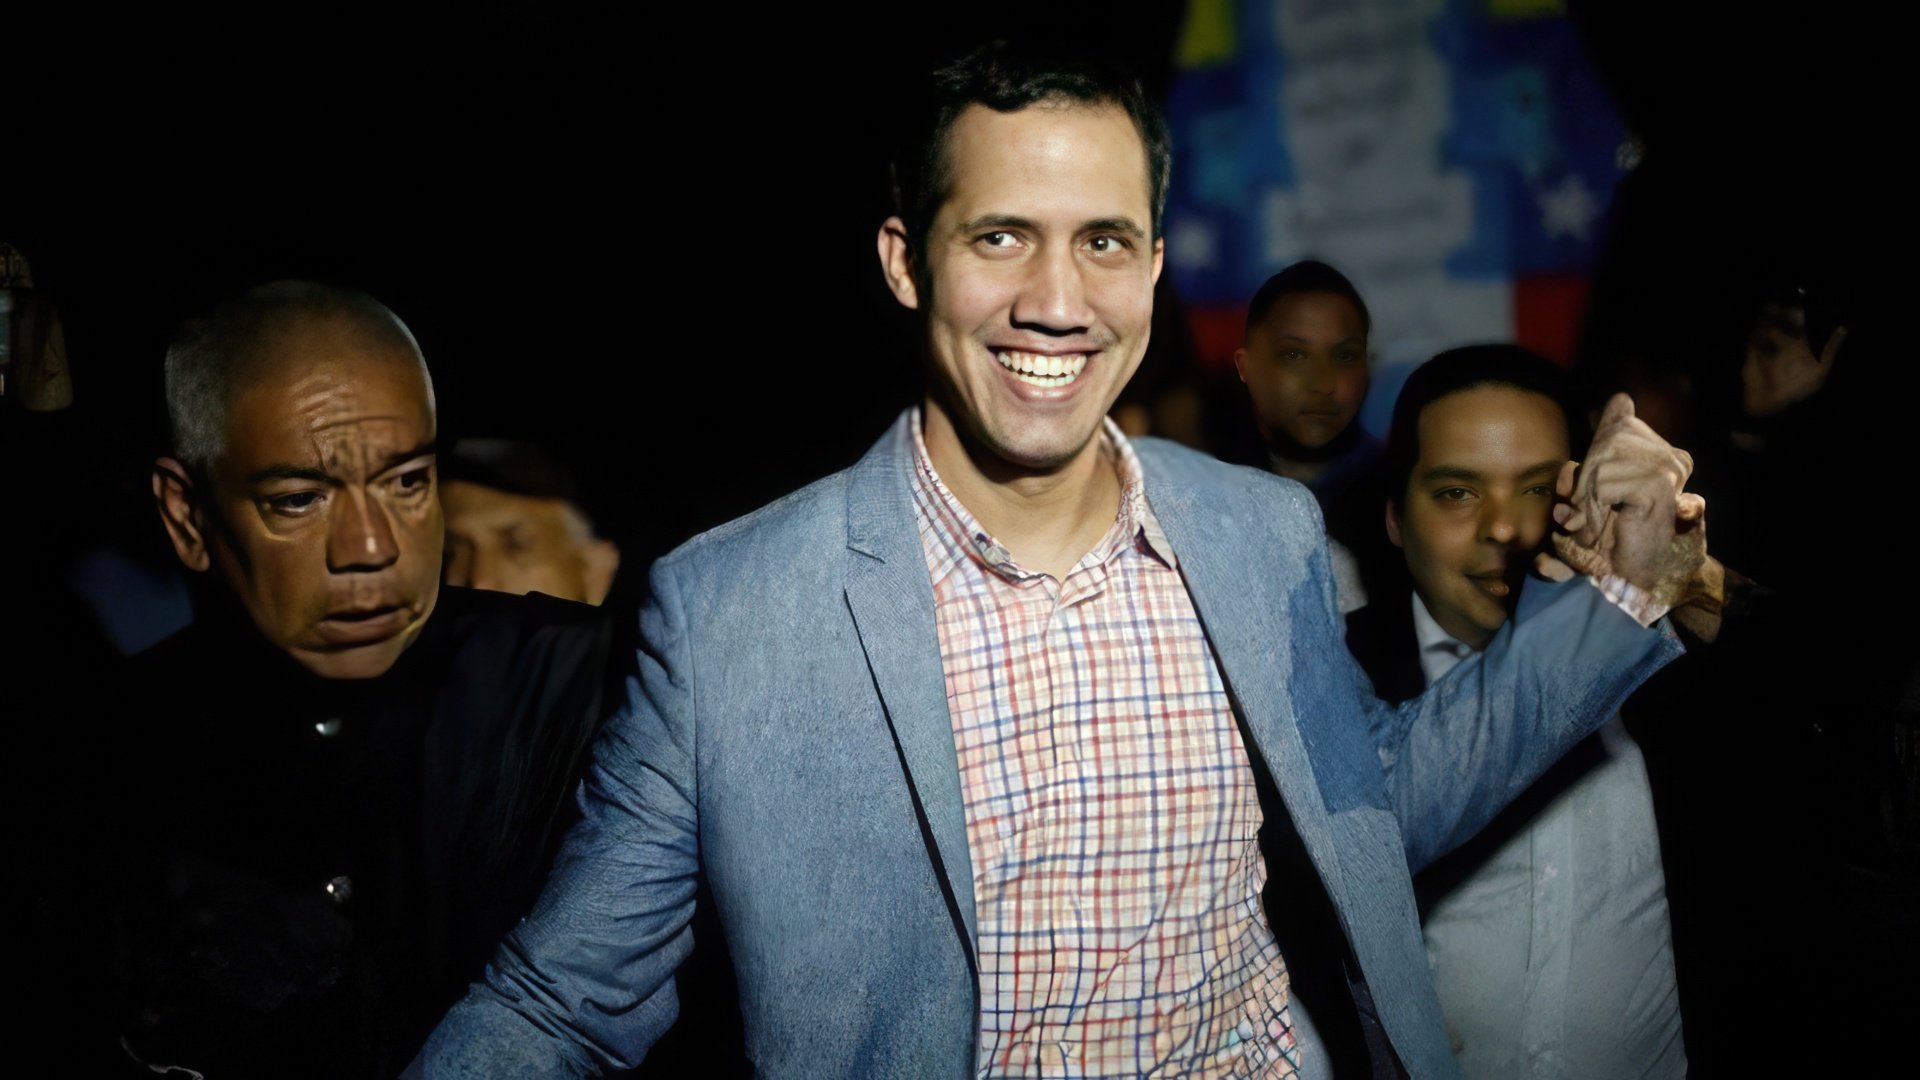 Juan Guaido also studied in the US